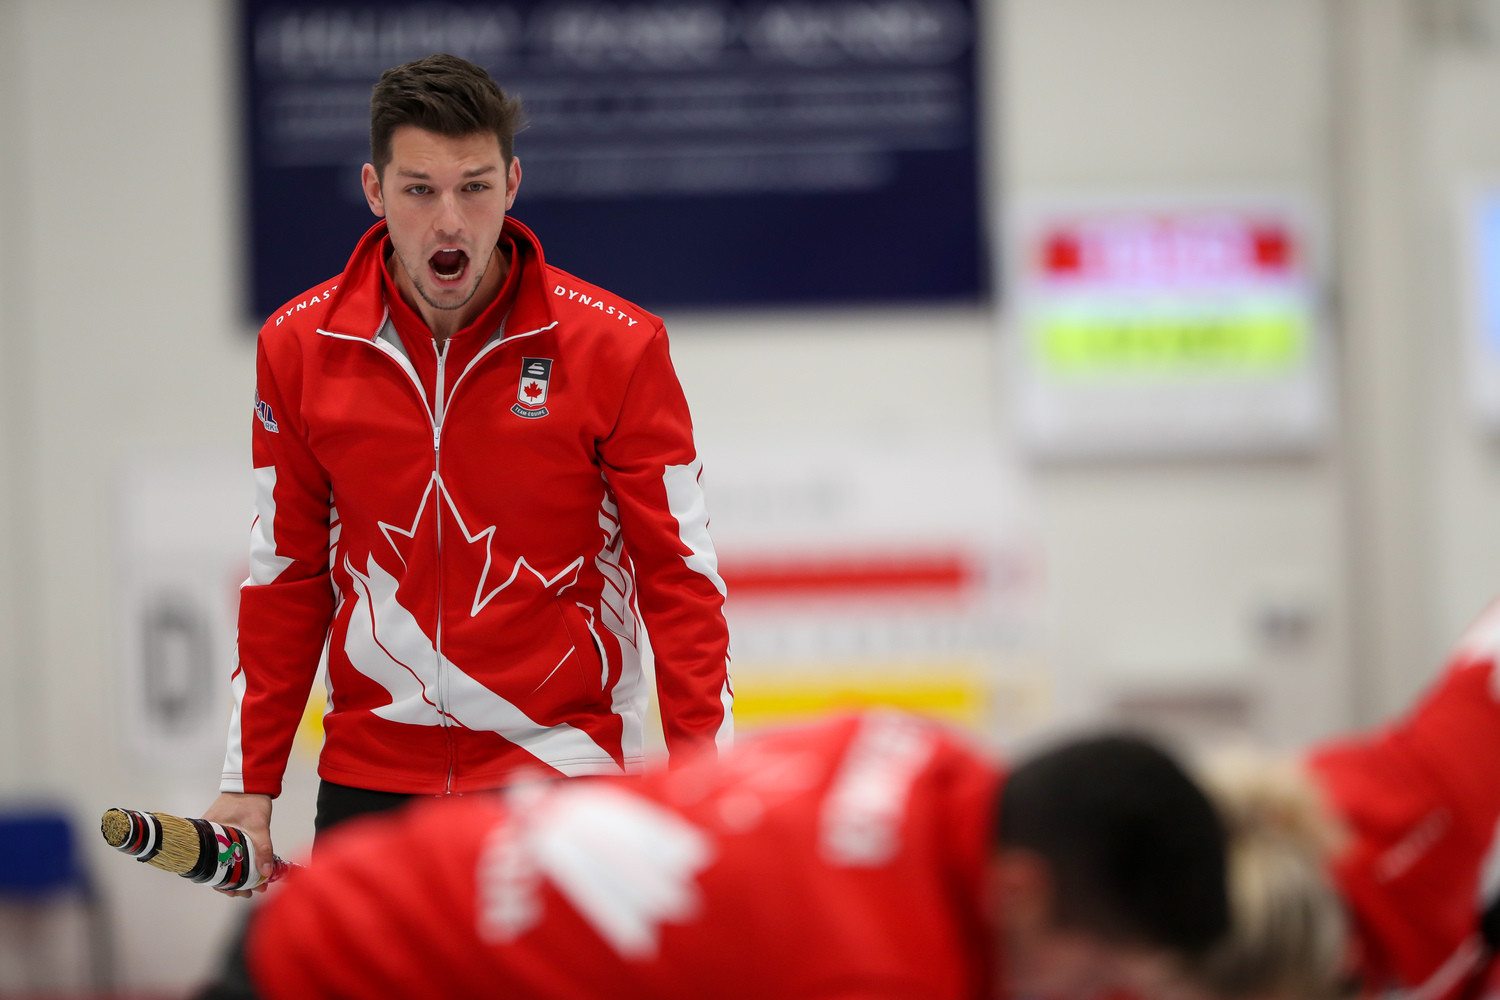 Canada maintained their 100 per cent start to the World Mixed Curling Championship today ©WCF